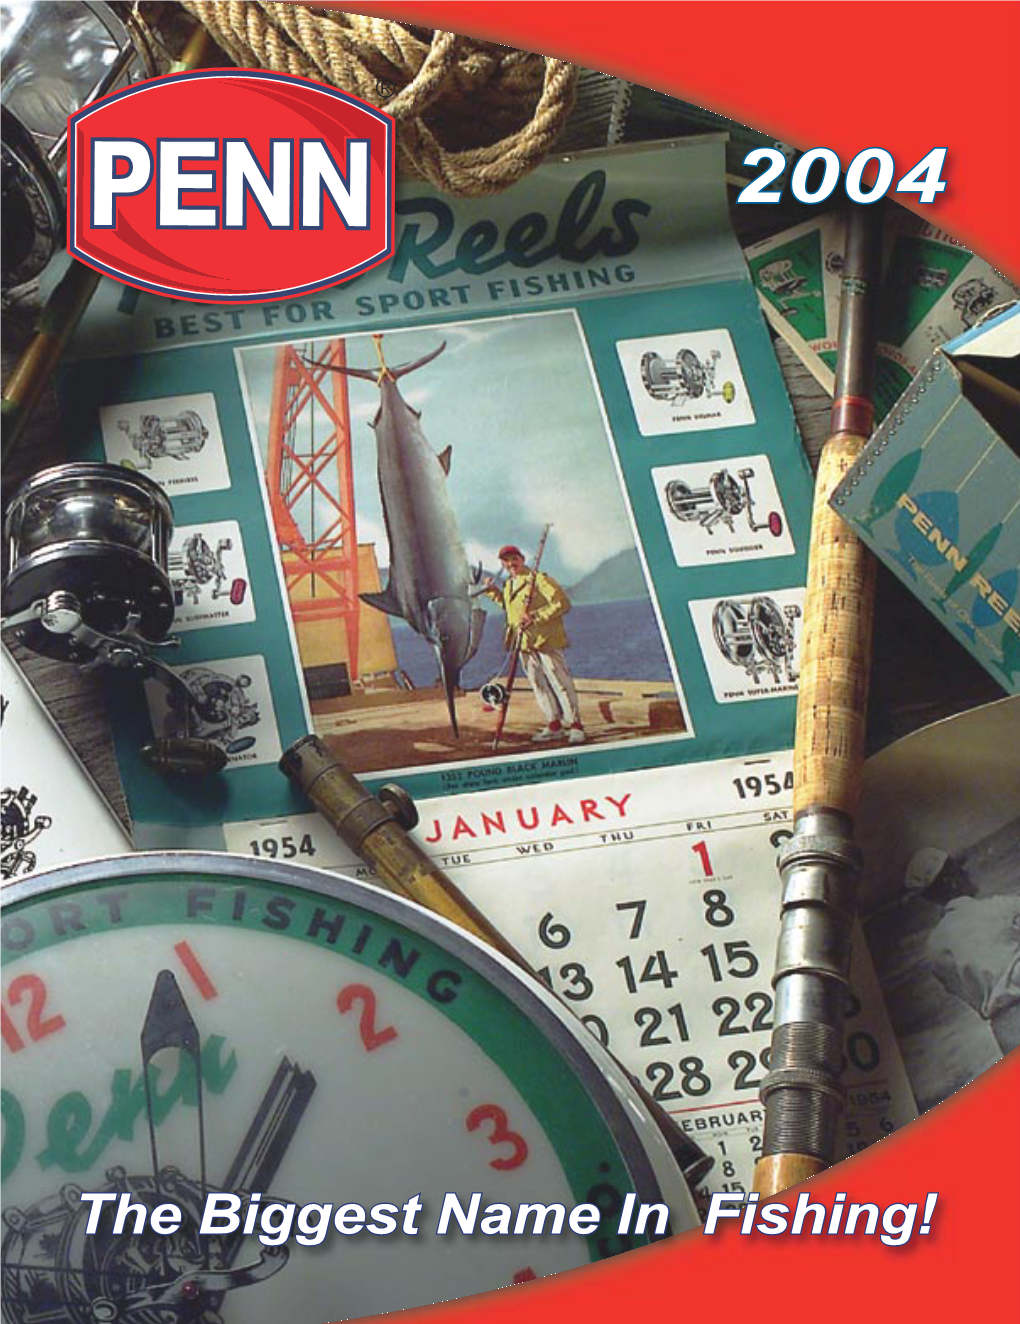 The Biggest Name in Fishing! Penn World Record Catches PENN REELS SOLD